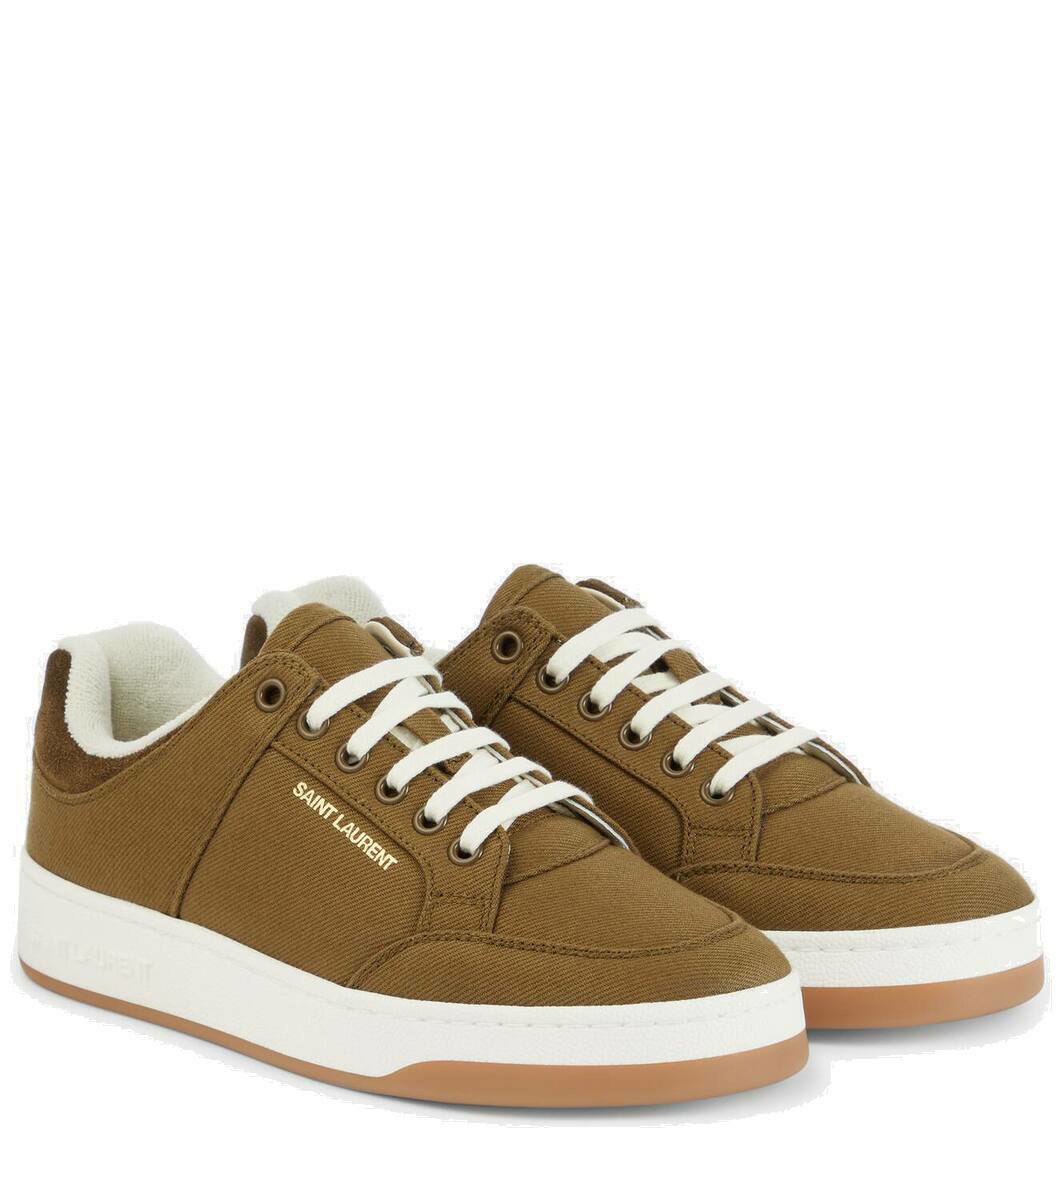 20mm Sl61 Leather Low Top Sneakers